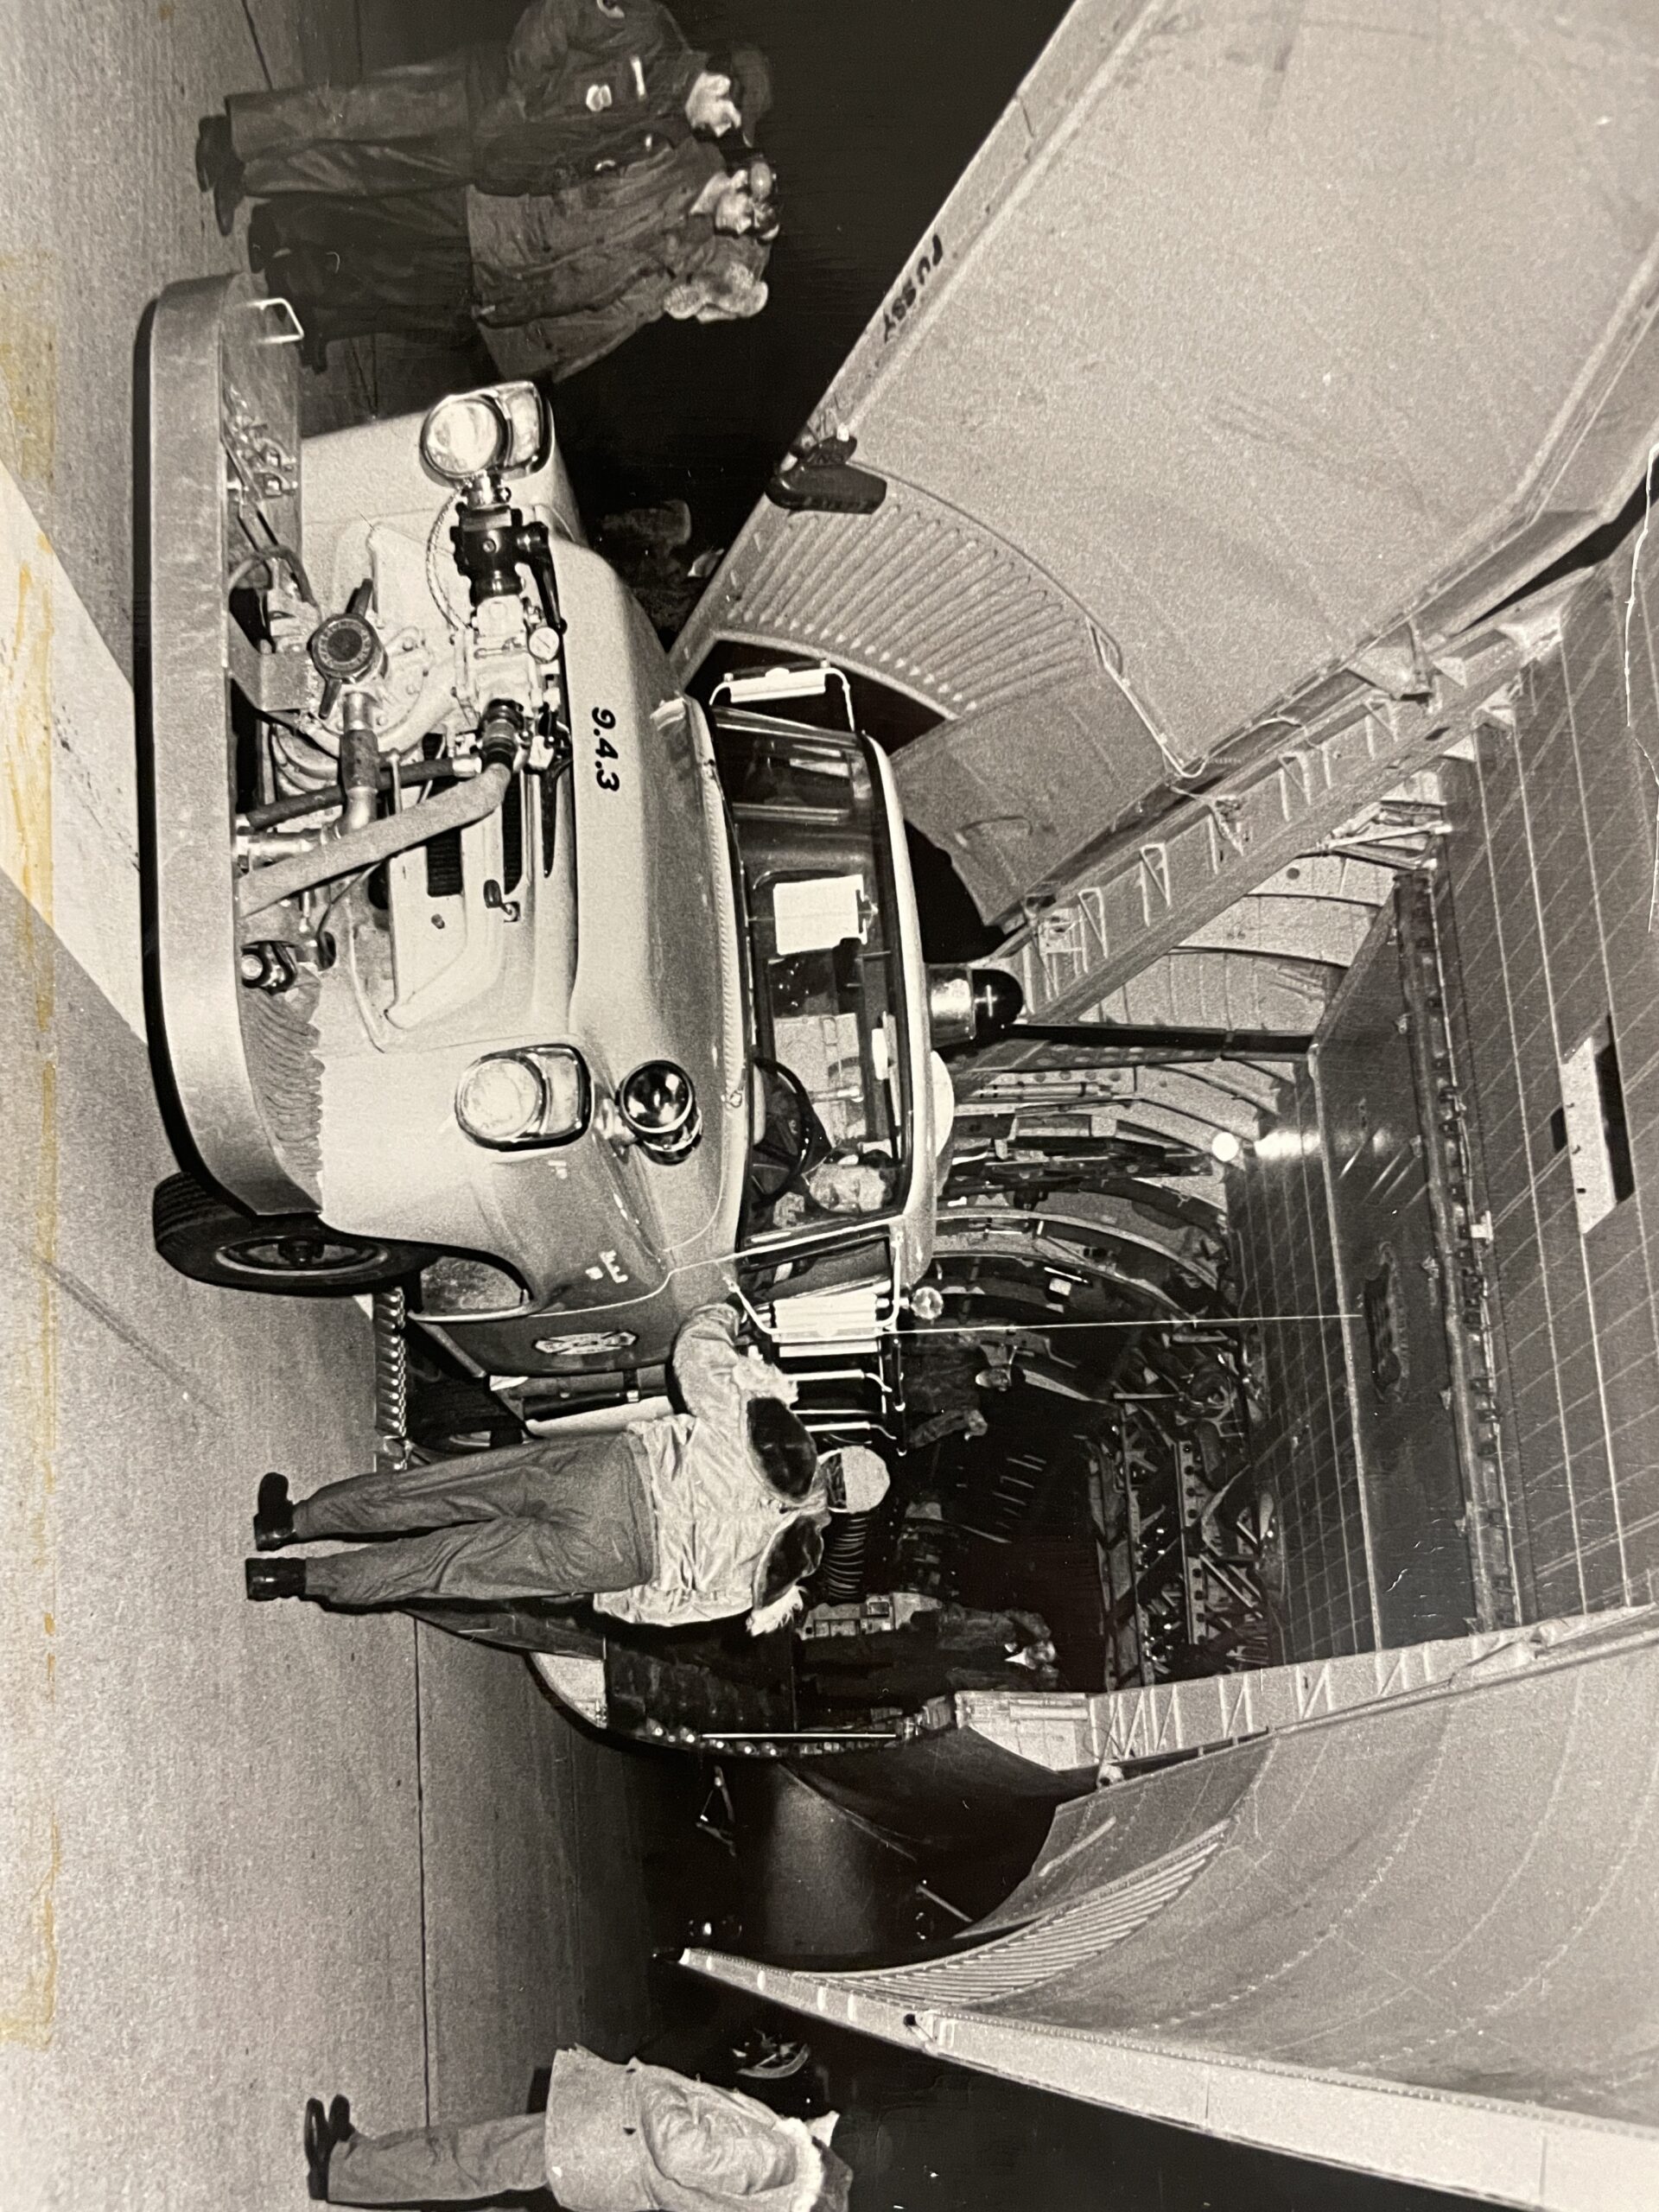 Bob Davis behind the wheel of a Springs Fire Department fire truck in 1977 as it is loaded onto a military plane in Westhampton, part of an airlift of local volunteer fire crews who went to Buffalo to help the city cope with a severe blizzard that buried fire hydrants and stranded many of the city's fire trucks.